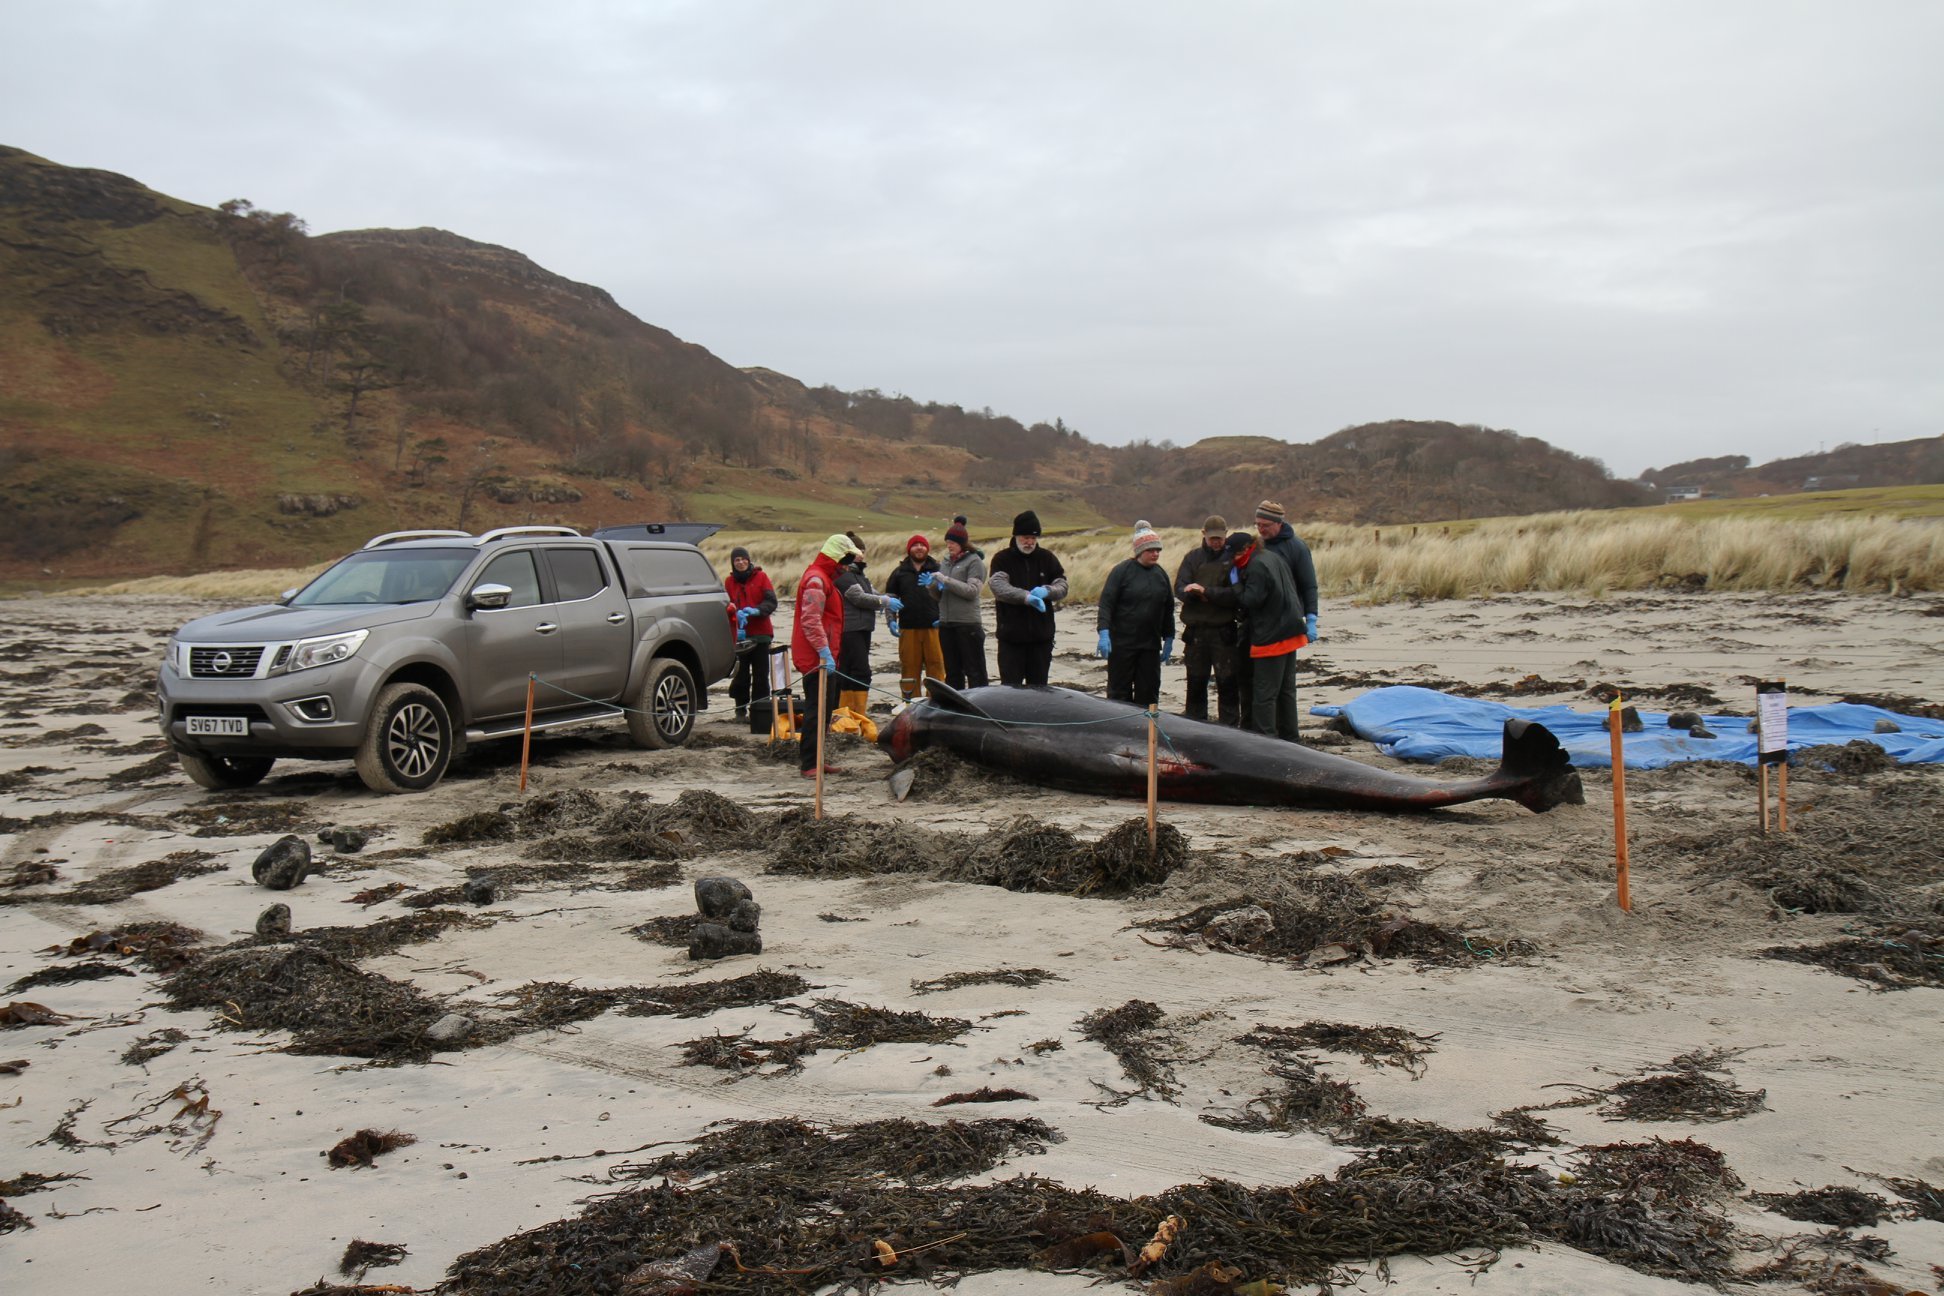 A long-finned pilot whale died after becoming stranded in Mull last month